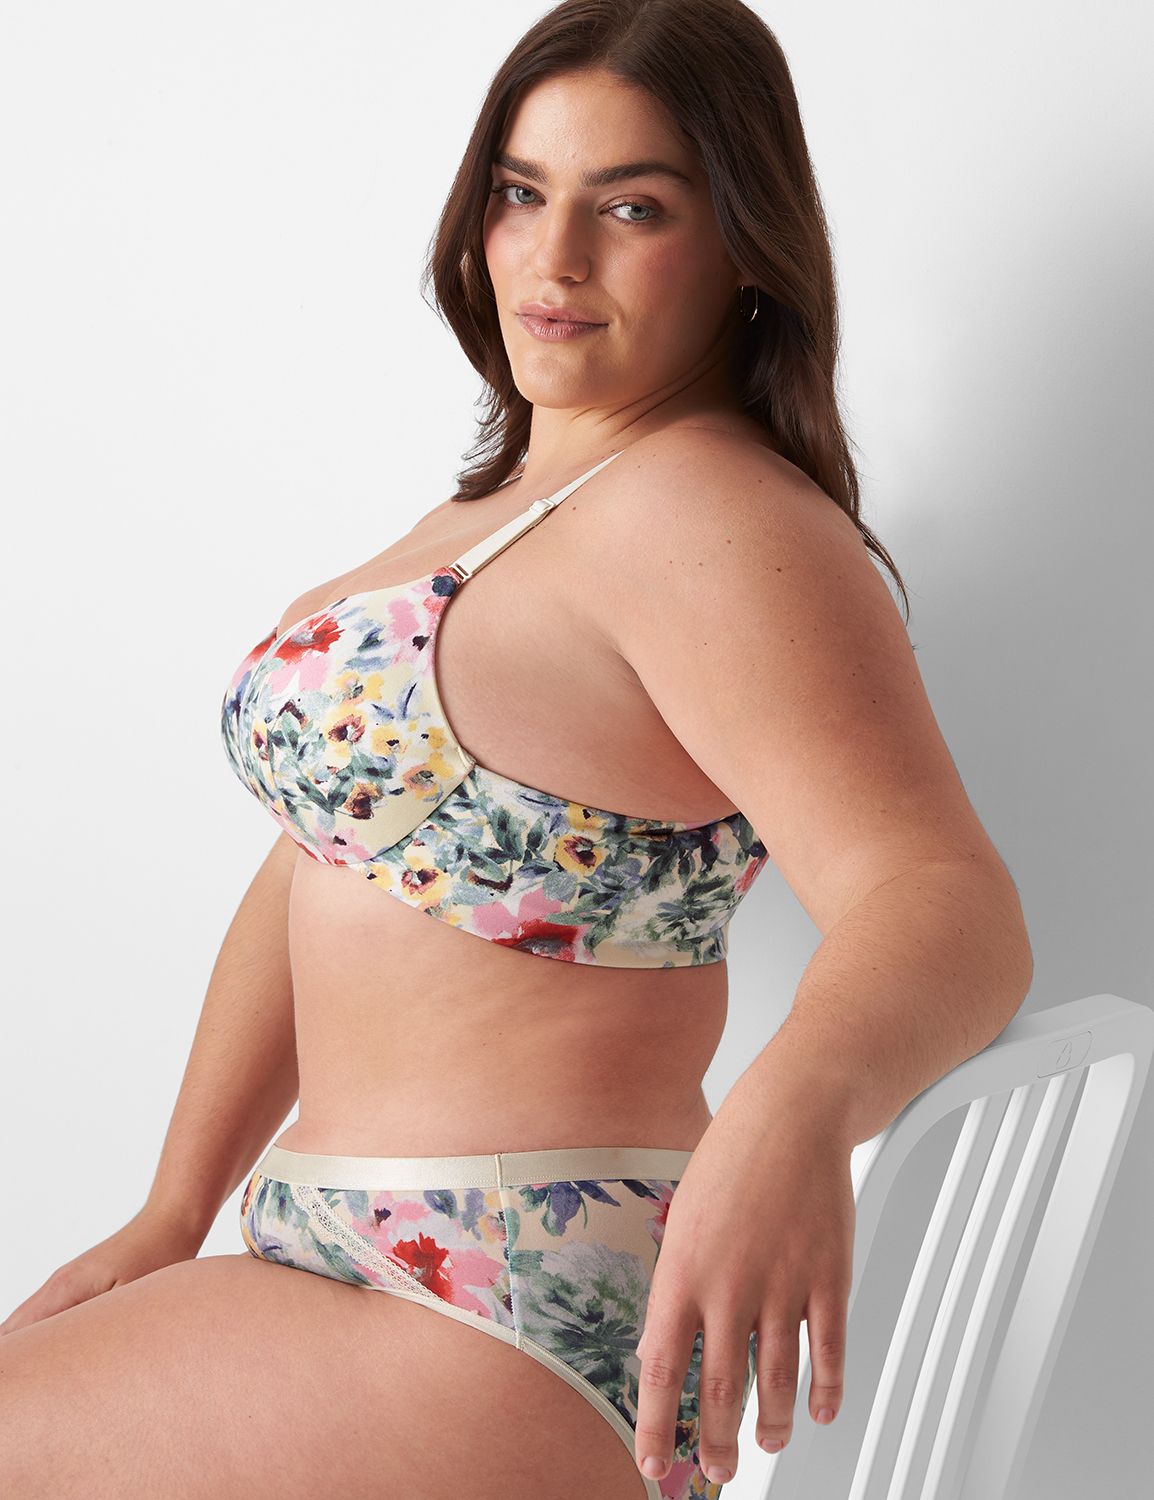 Lane Bryant - We don't just make bras. We make smiles. Lots of smiles. Lots  of sizes. Head over to Cacique for more. #ForTheLoveOfCurves